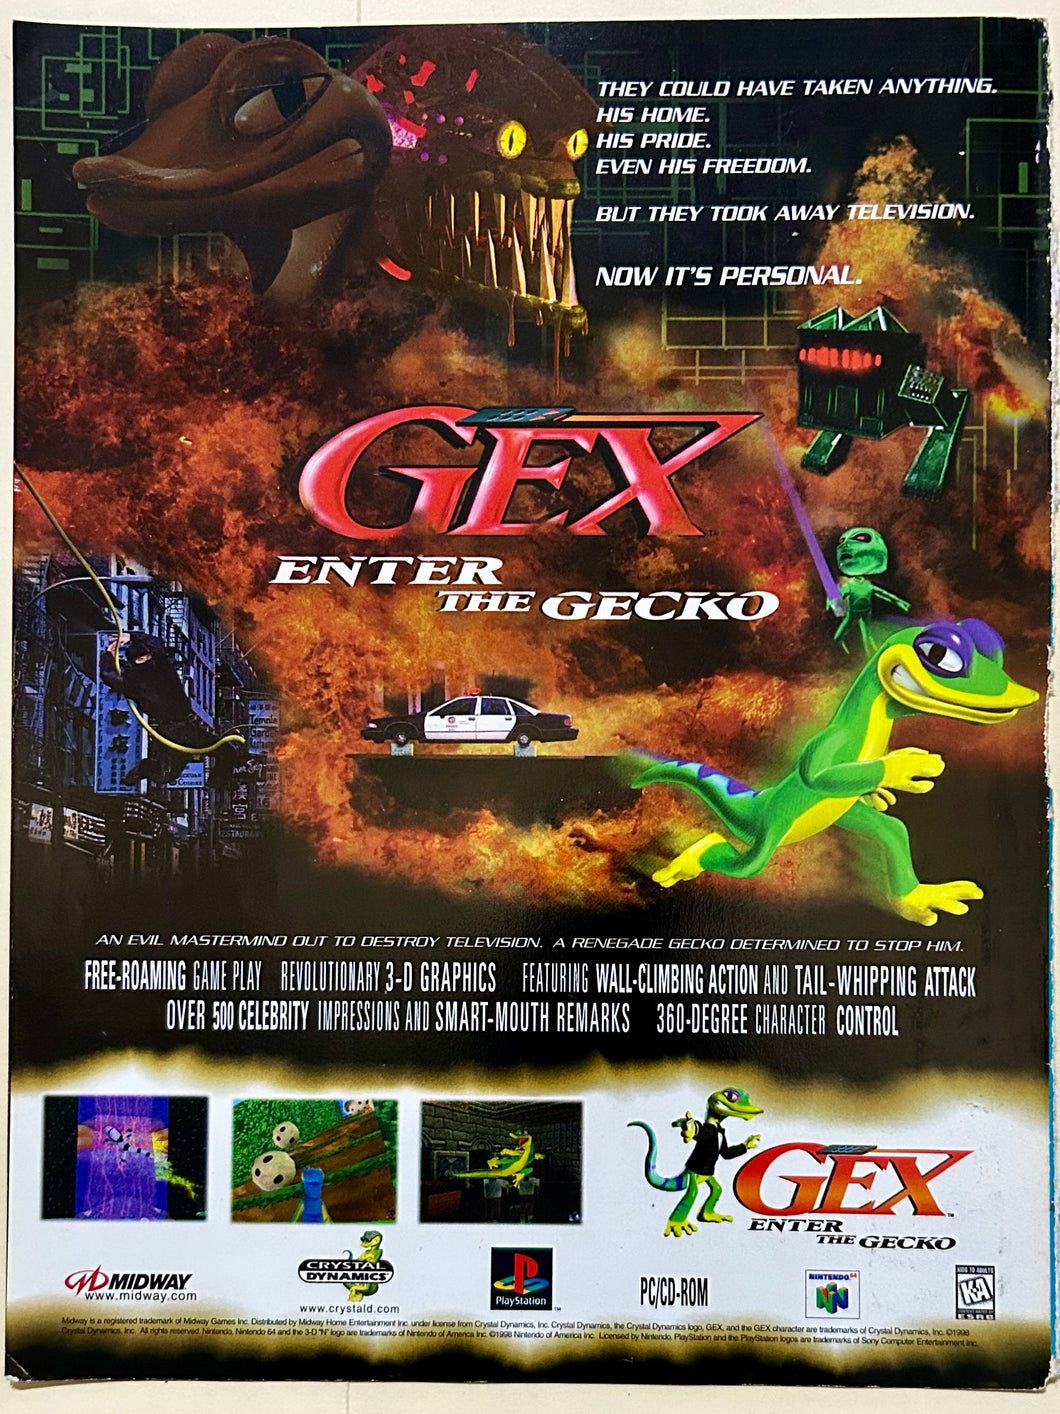 Gex: Enter the Gecko - PlayStation N64 - Original Vintage Advertisement - Print Ads - Laminated A4 Poster